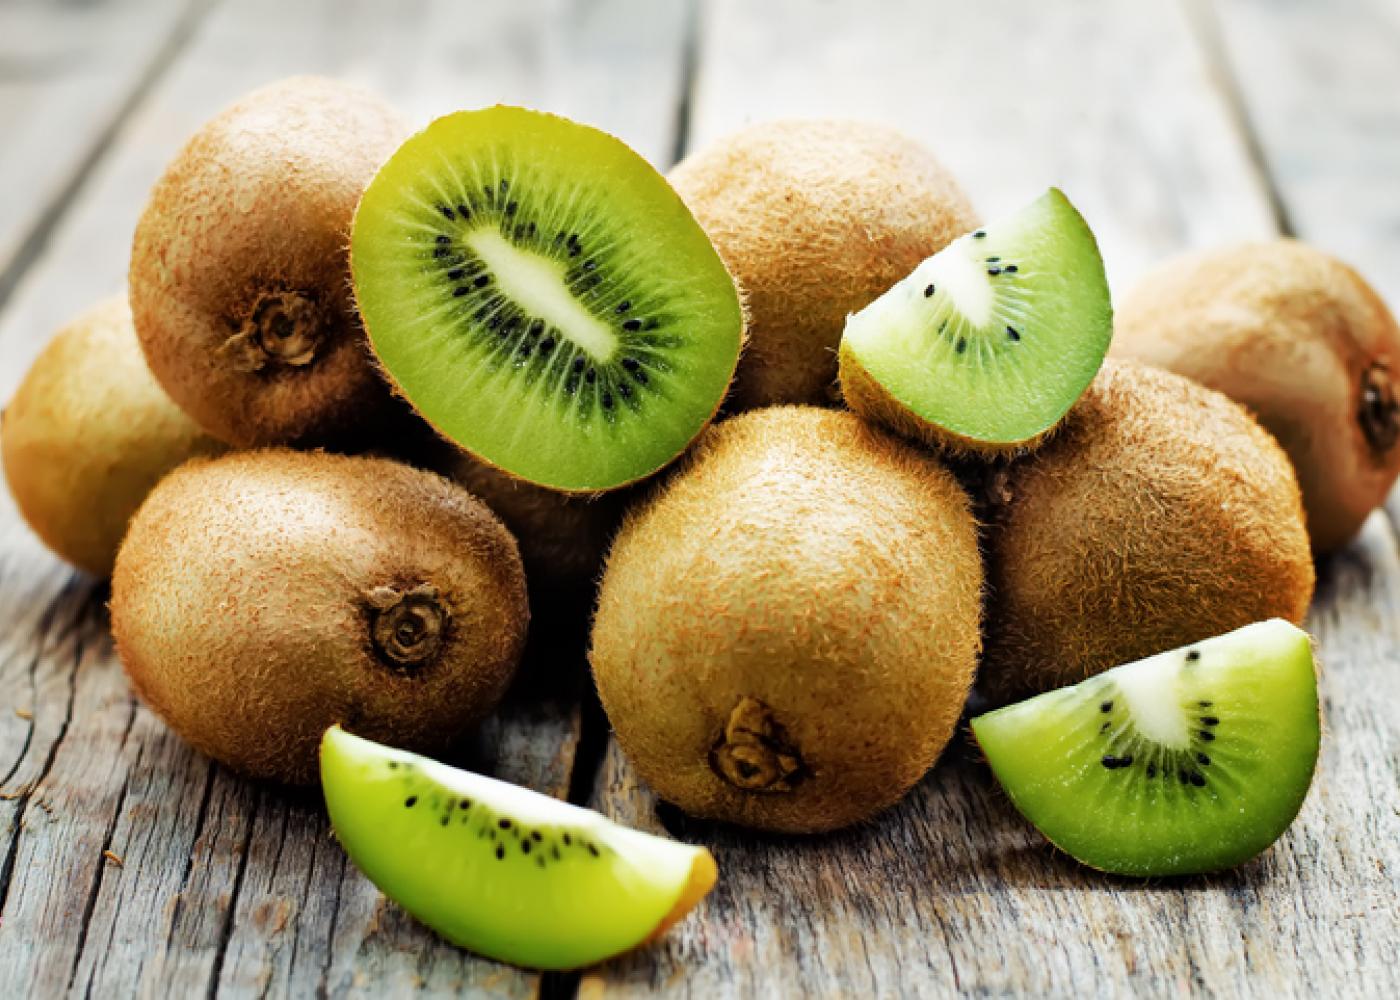 Can You Get Through This Quiz Without Getting Tricked? kiwi fruit